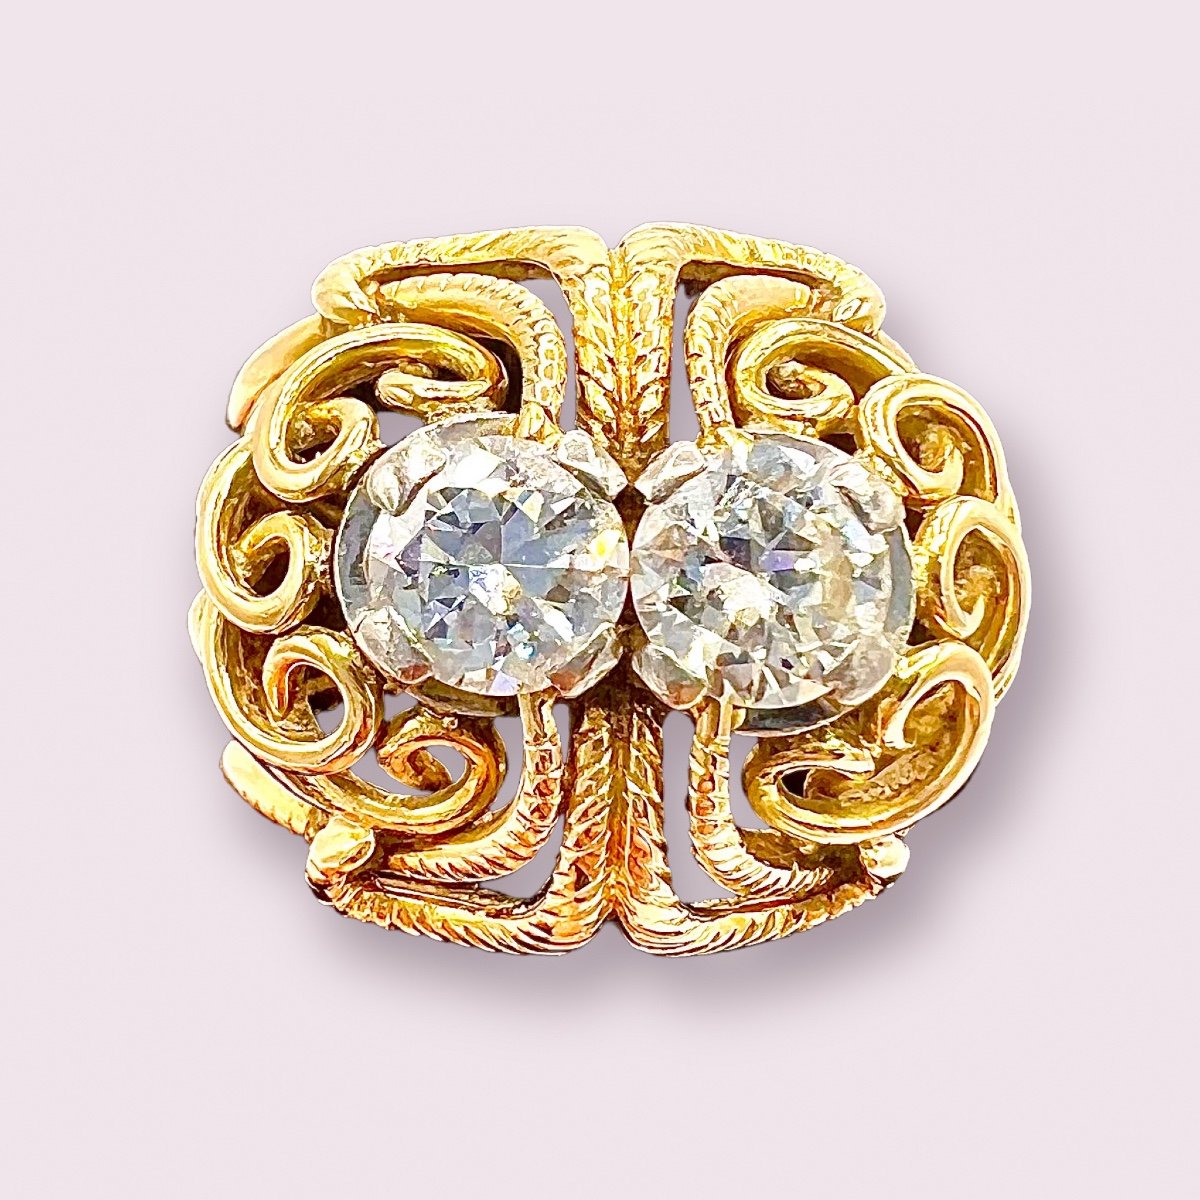 Superb Cocktail Ring From The 1950s In 18 Carat Gold, Set With Two Modern Cut Diamonds,